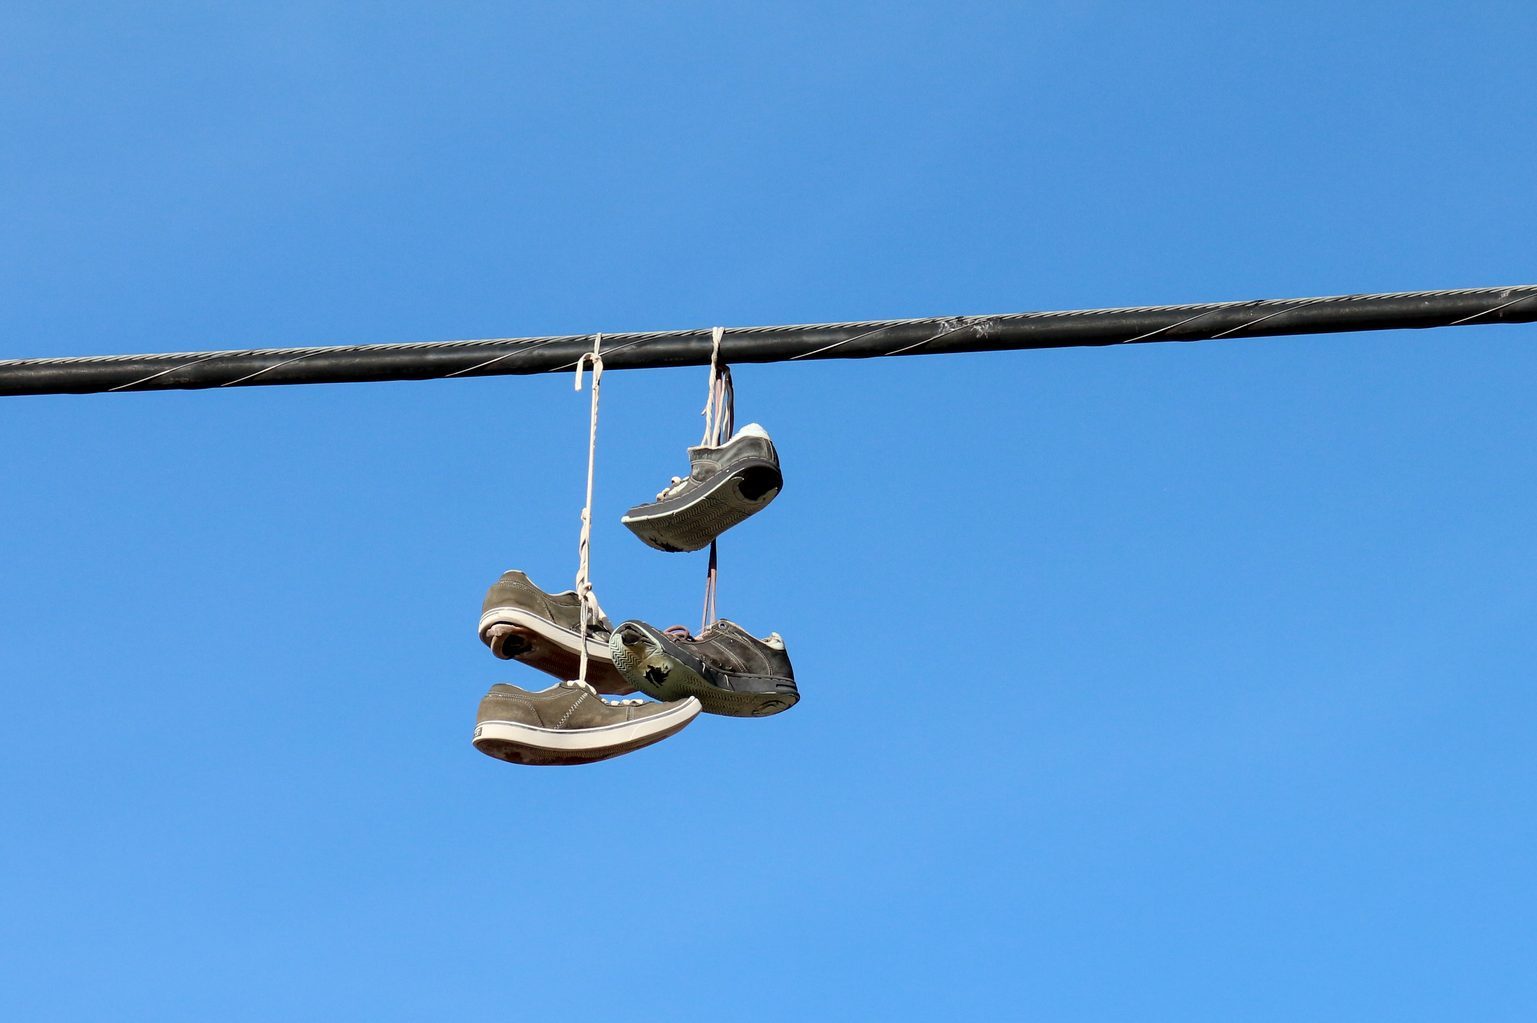 Total 44+ imagen shoes on power lines